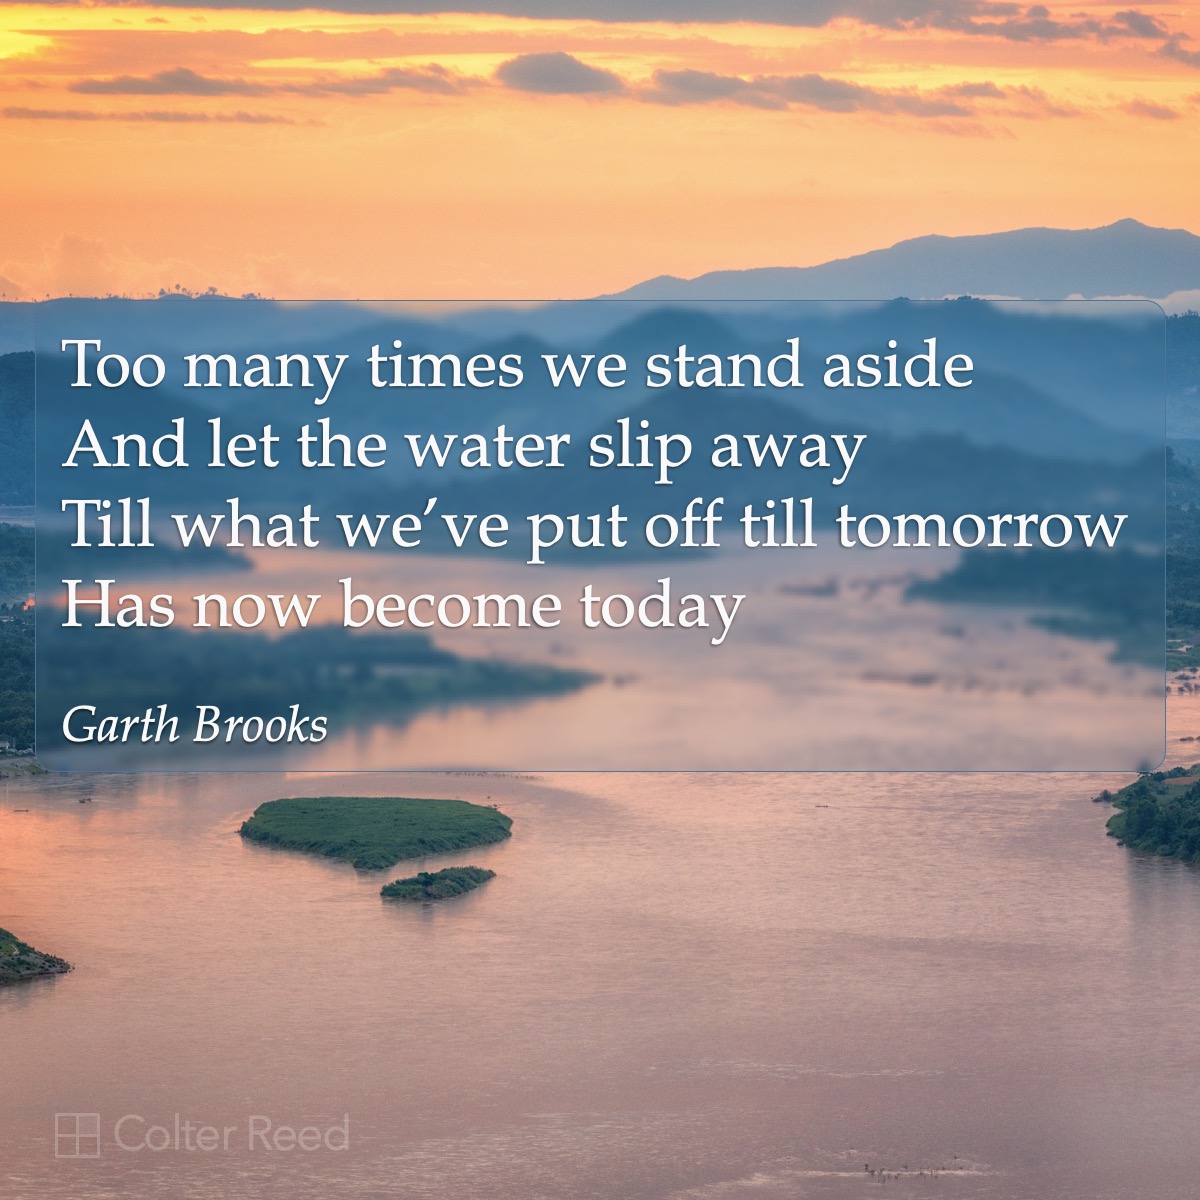 Too many times we stand aside and let the water slip away till what we’ve put off till tomorrow has now become today. —Garth Brooks